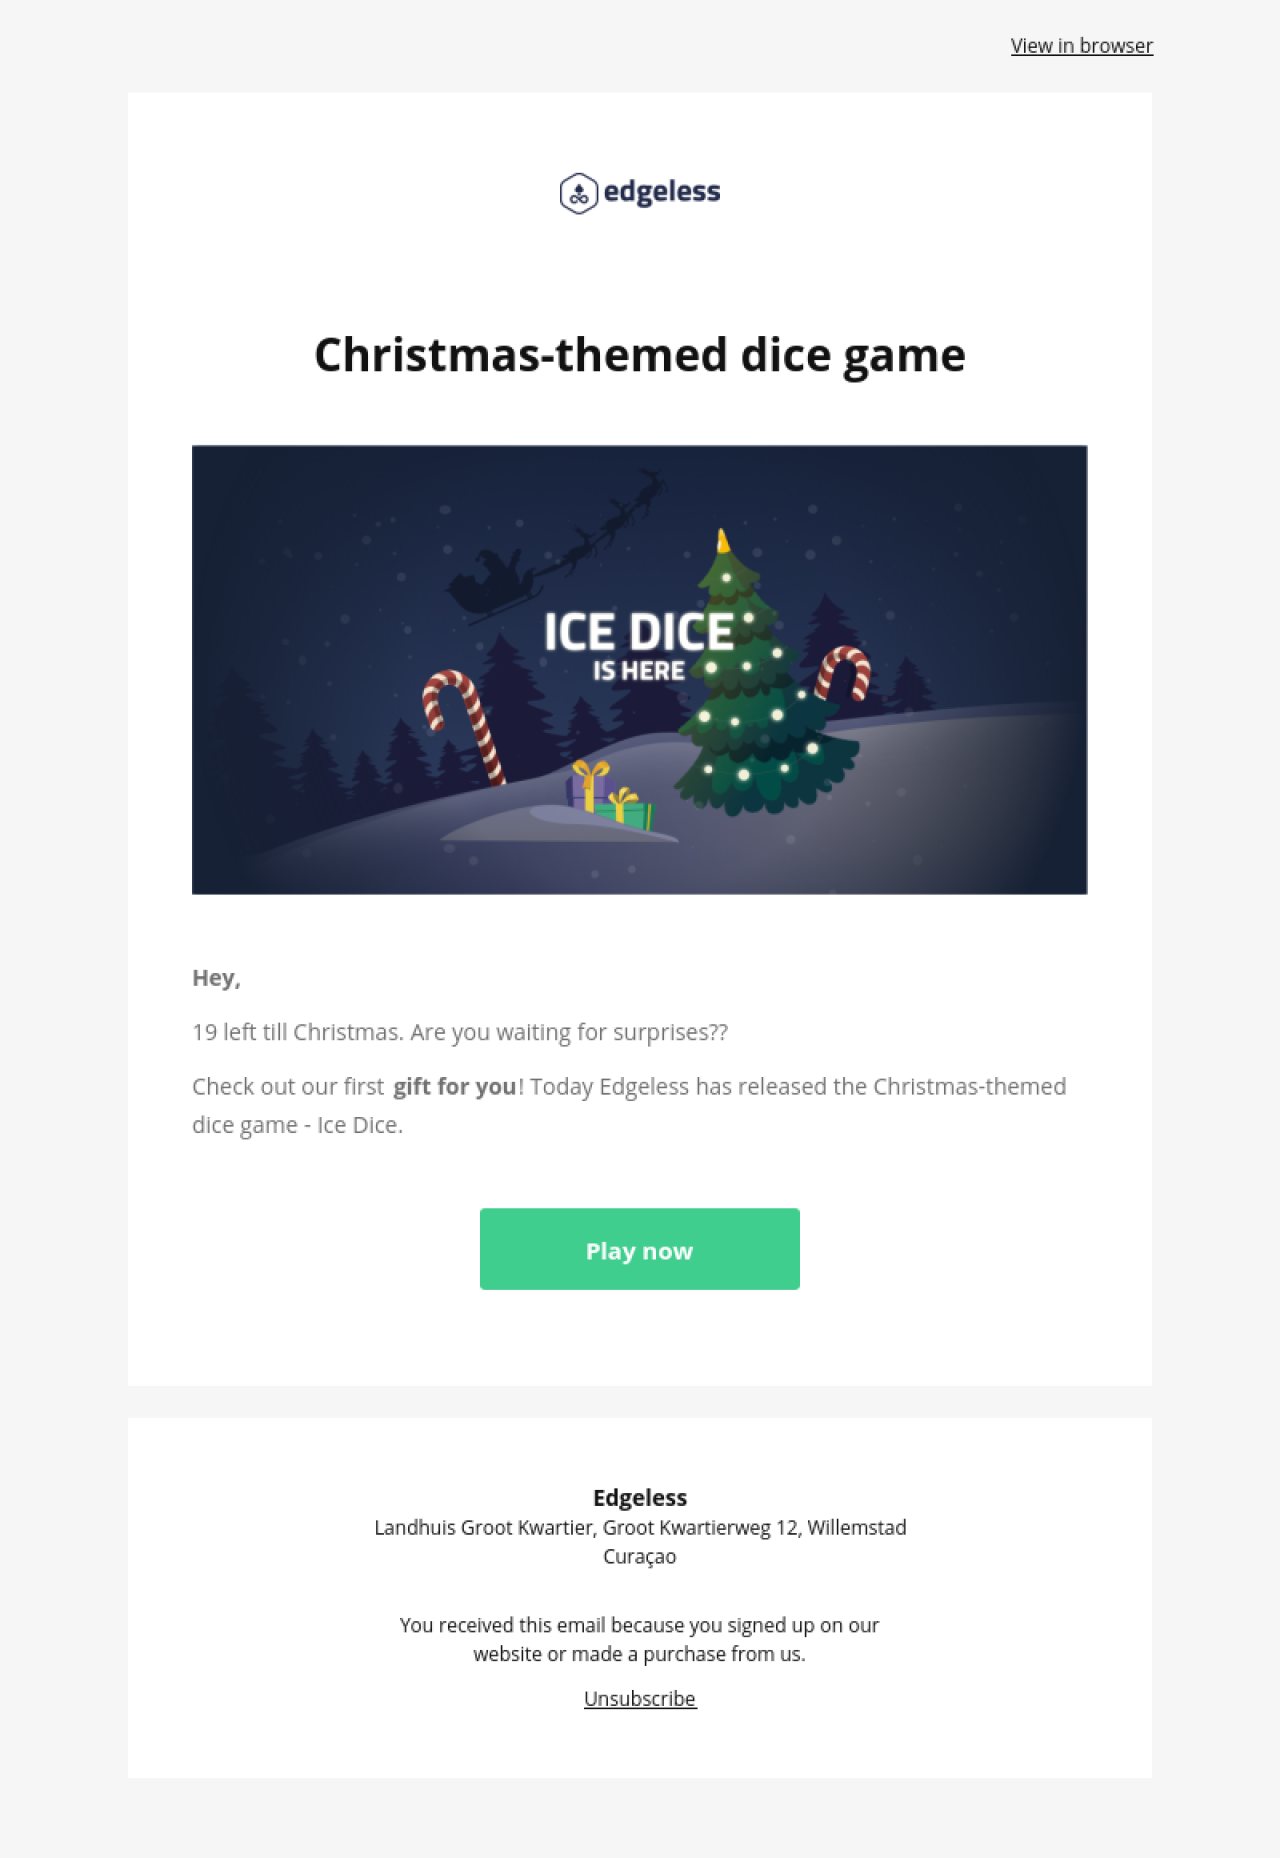 Edgeless - Christmas example - Made with MailerLite